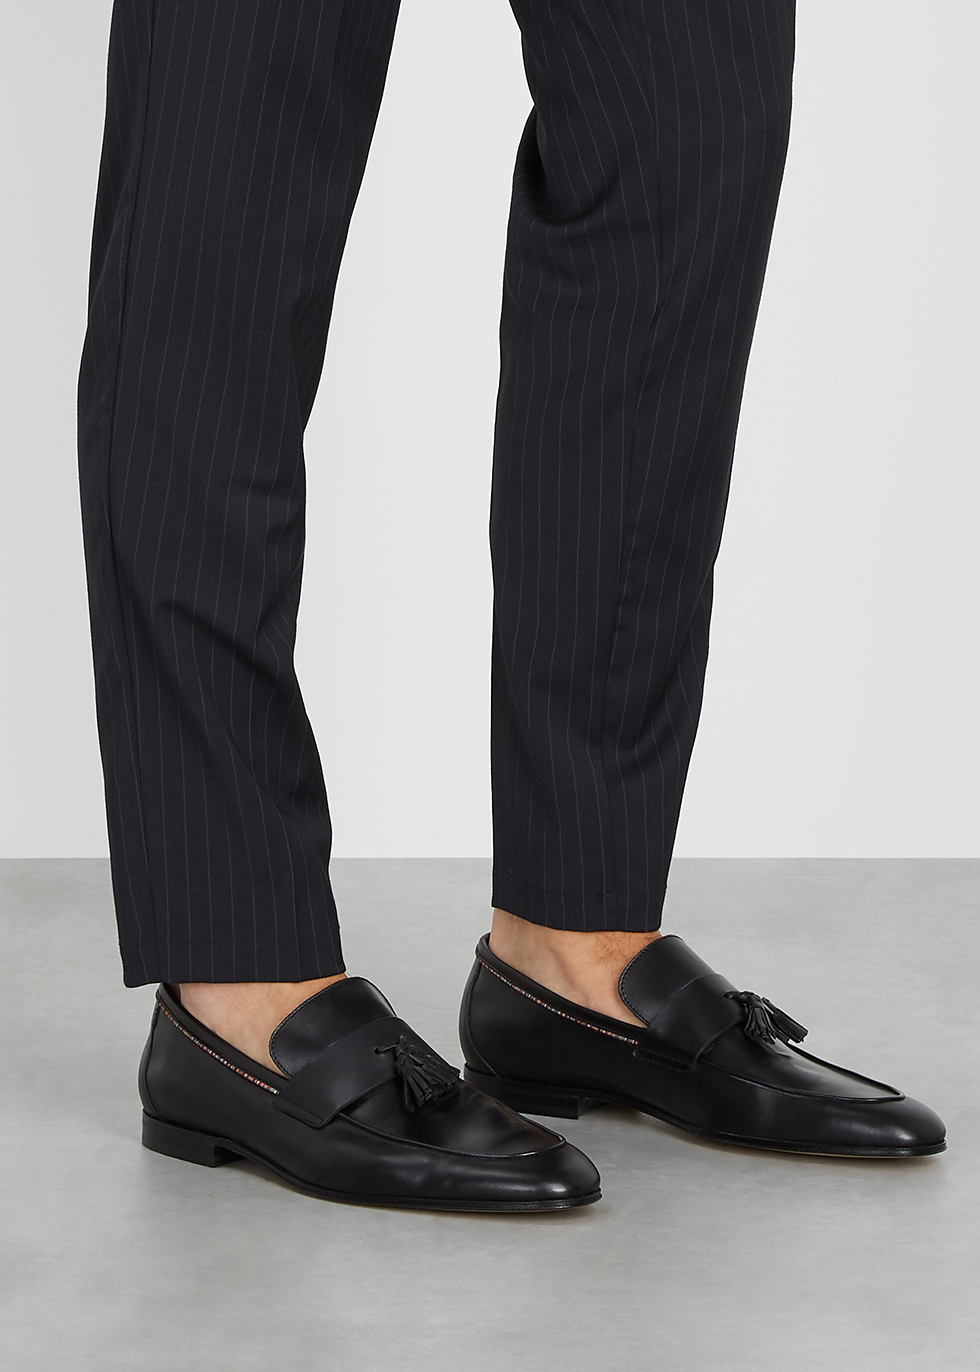 Paul Smith Hilton black leather loafers 